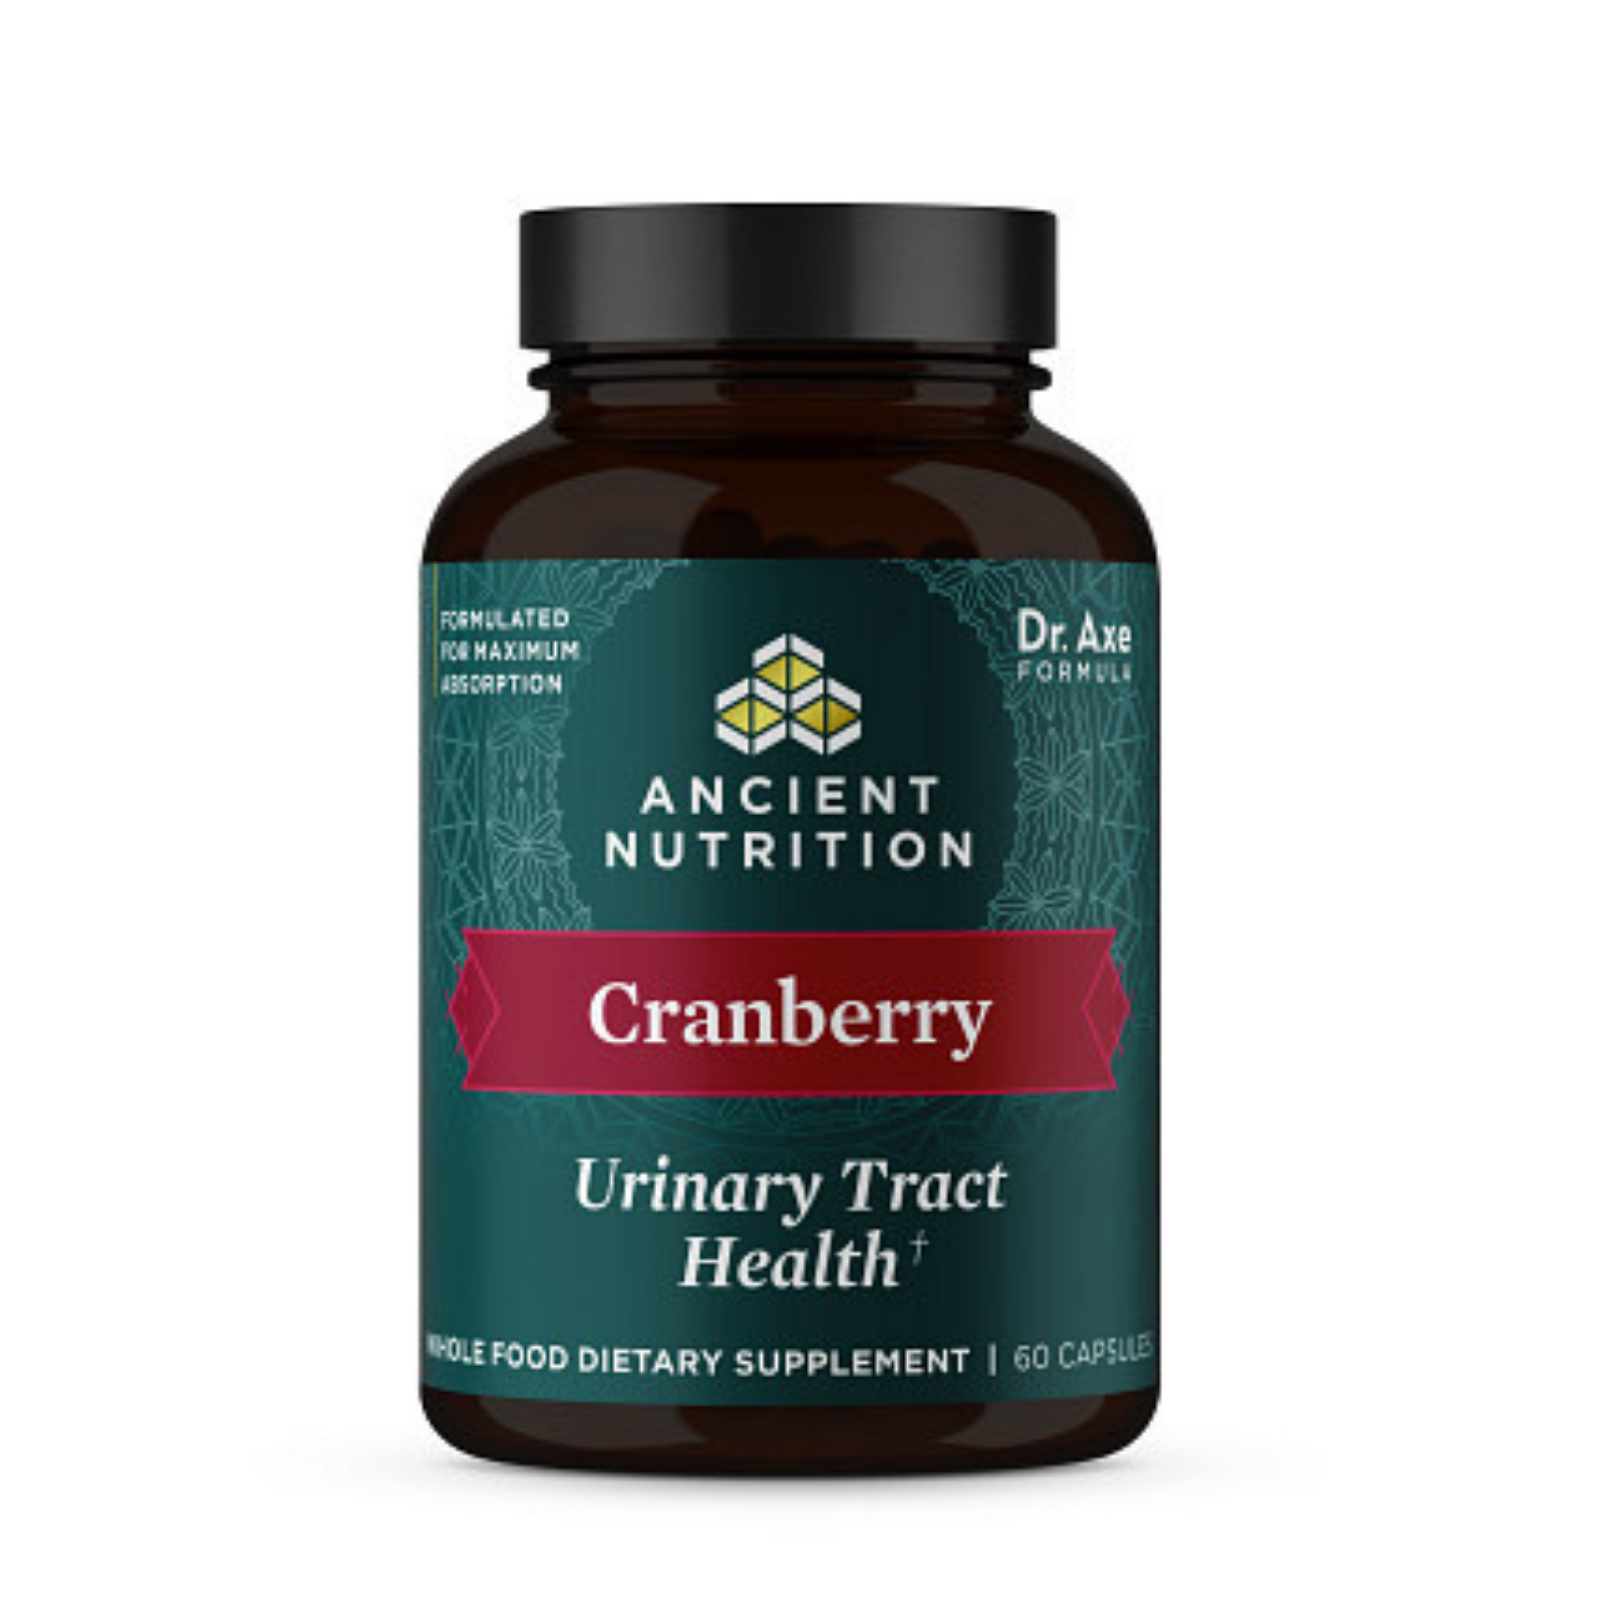 Cranberry Urinary Tract Health Capsules front of bottle